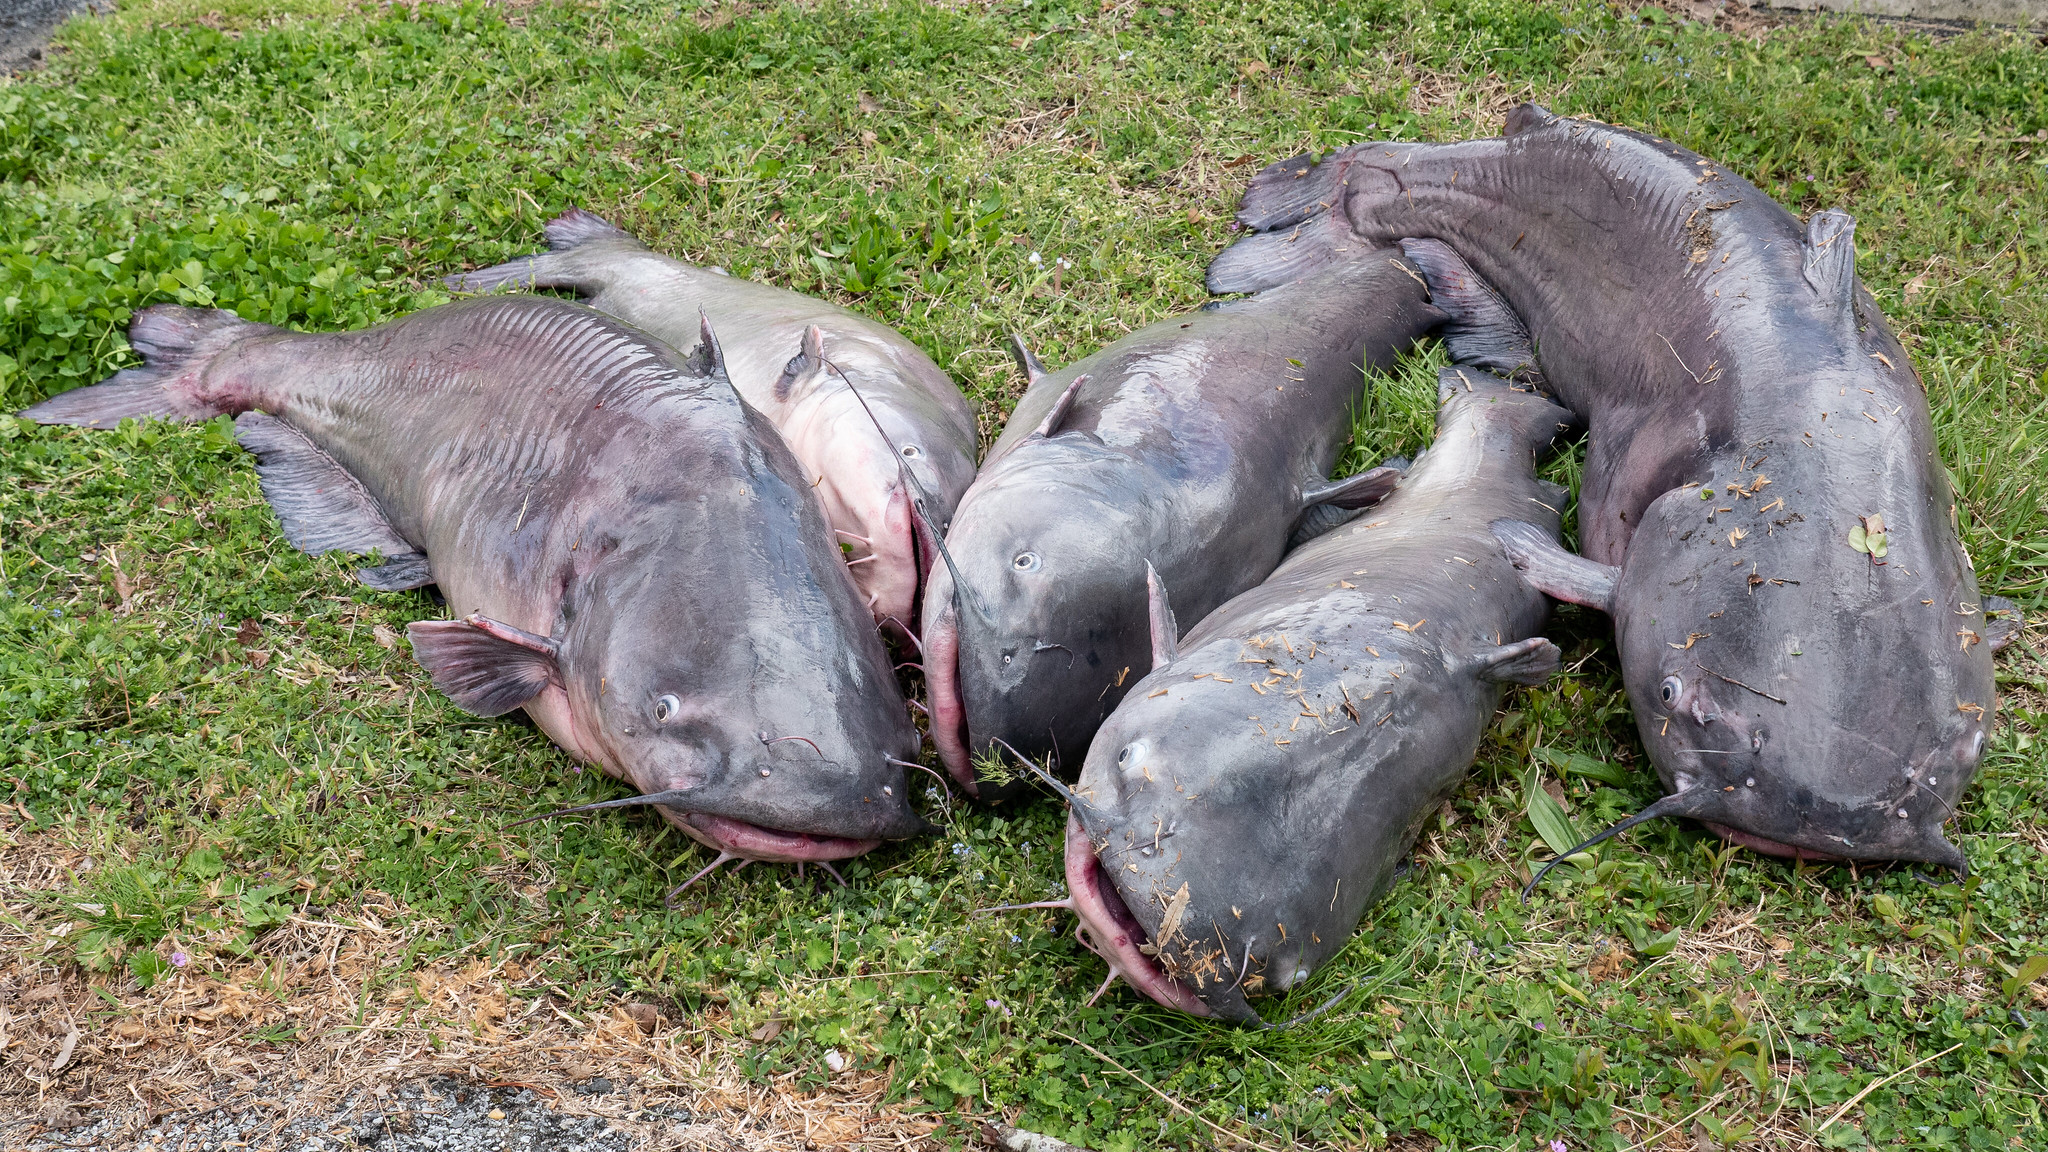 Blue Catfish Are Spreading Rapidly in Maryland Waters, As State